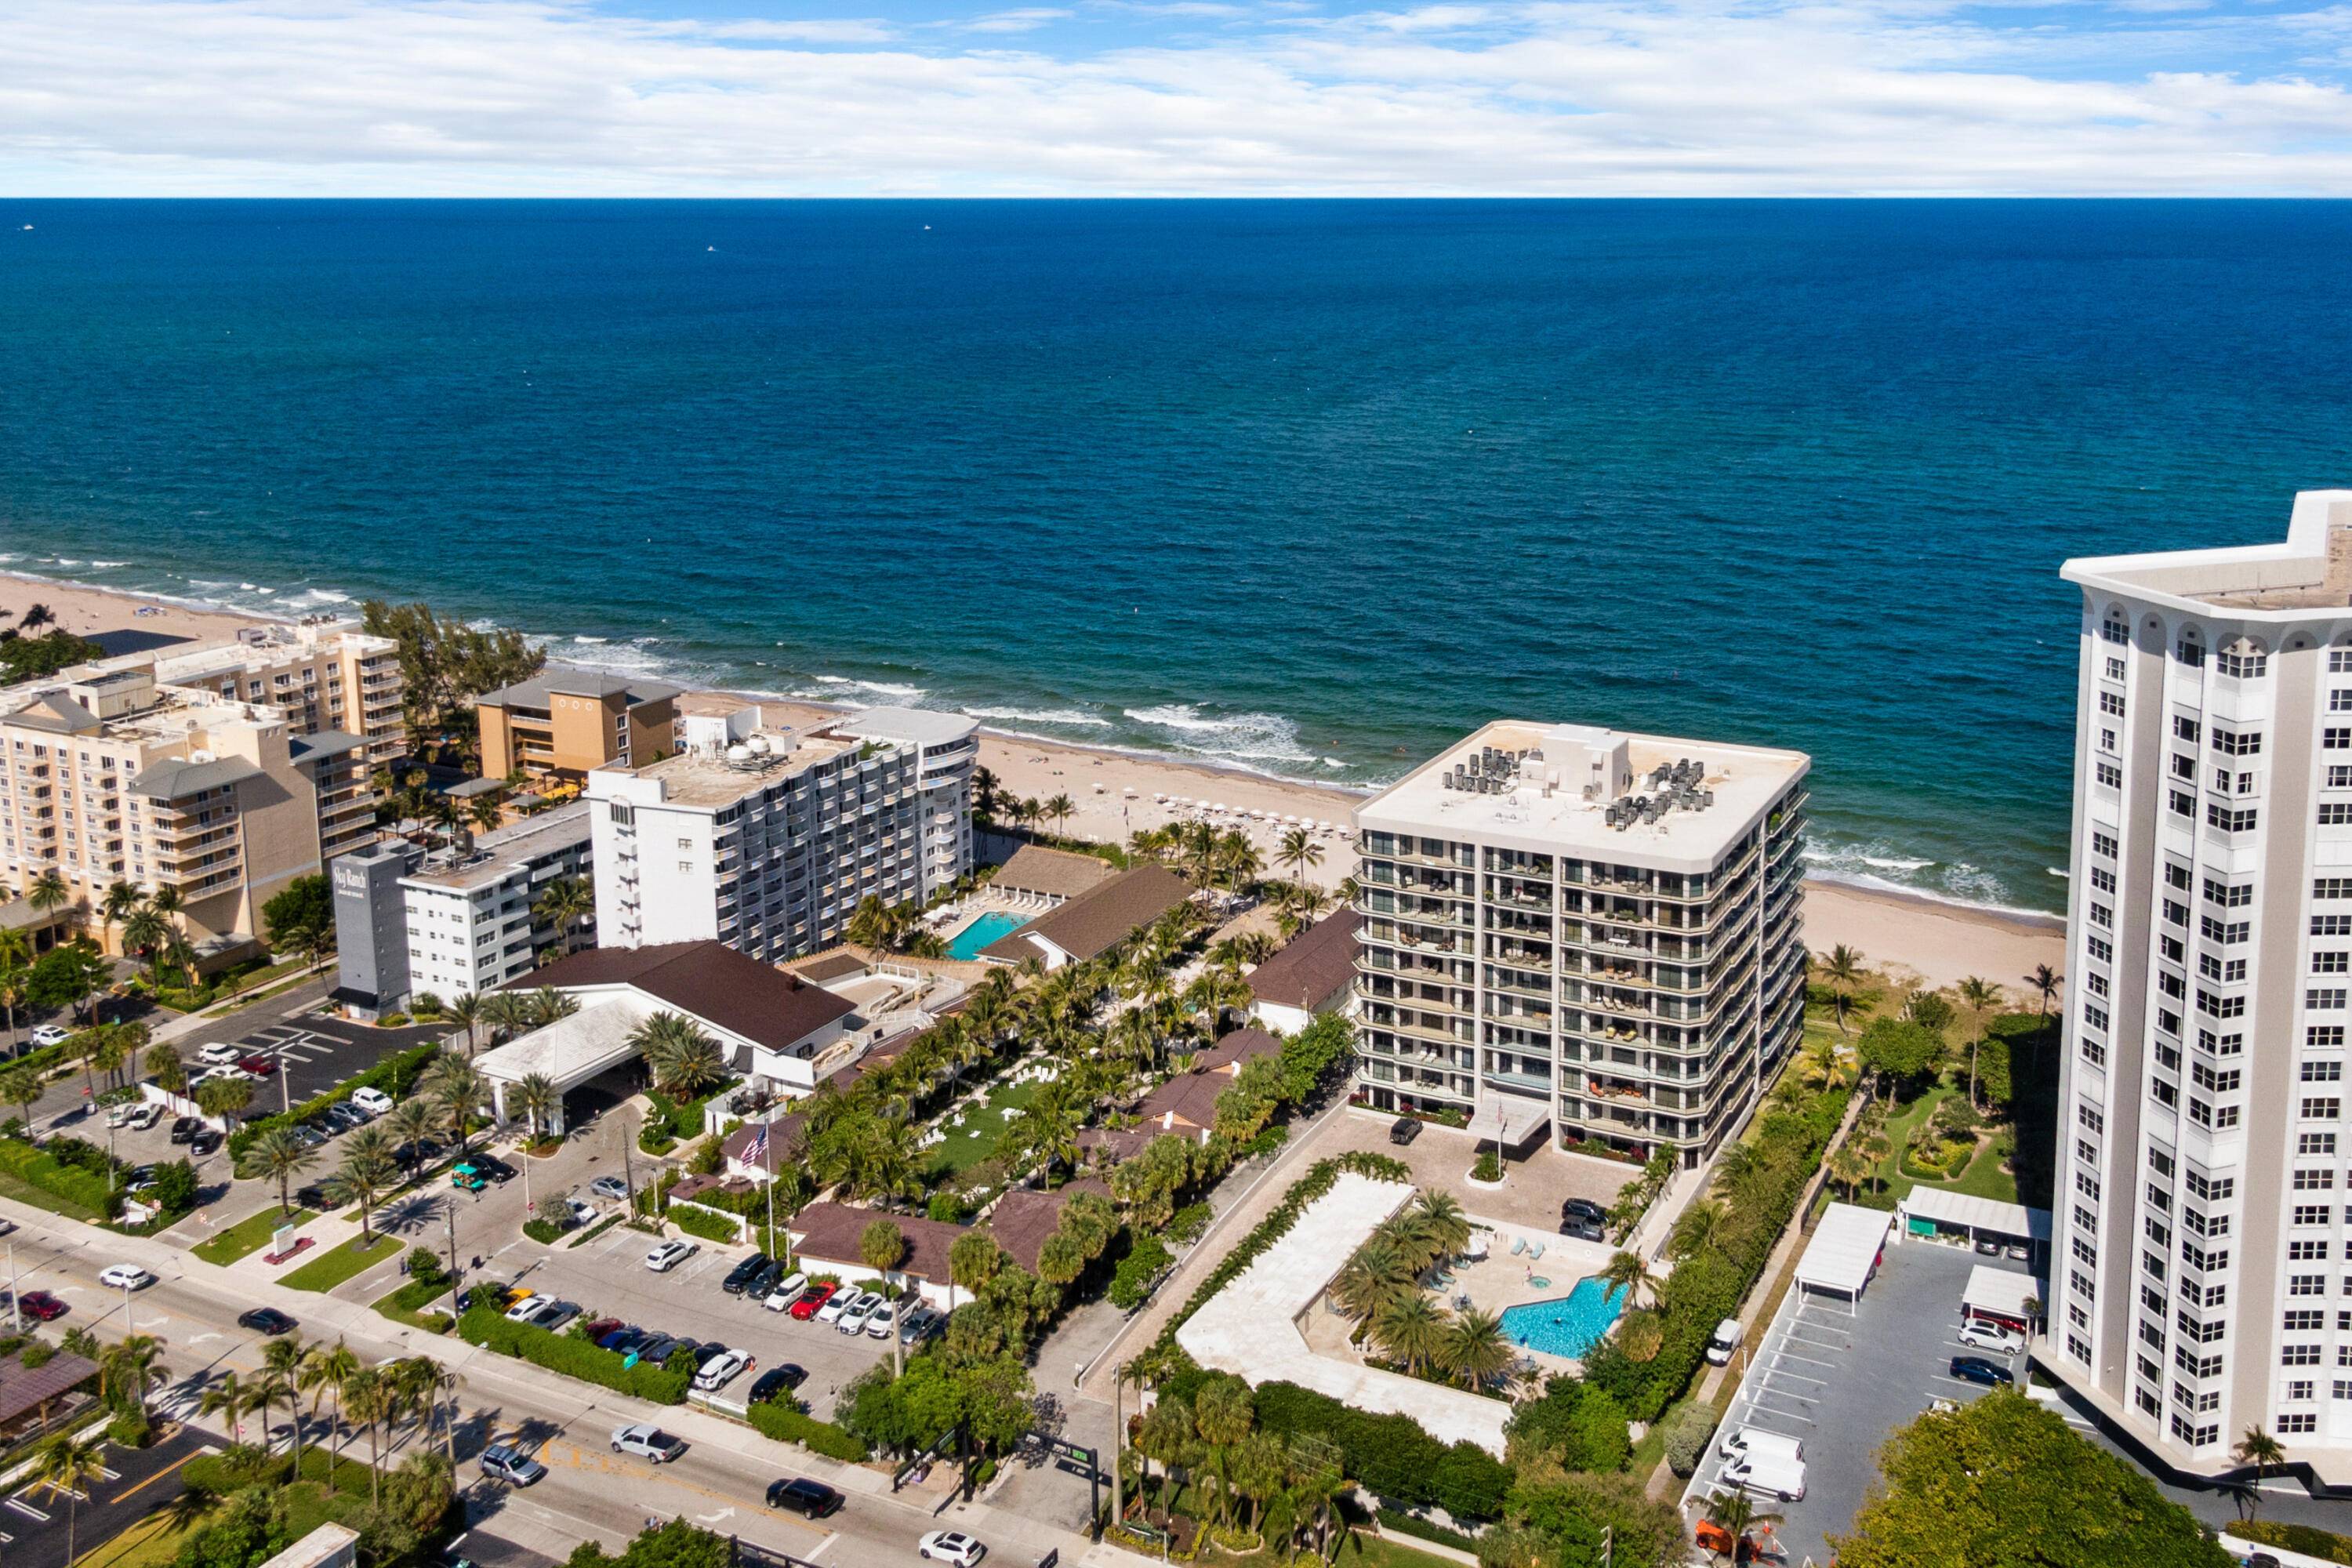 Experience 5 star oceanfront living first hand with this fully furnished, turnkey luxury condo !